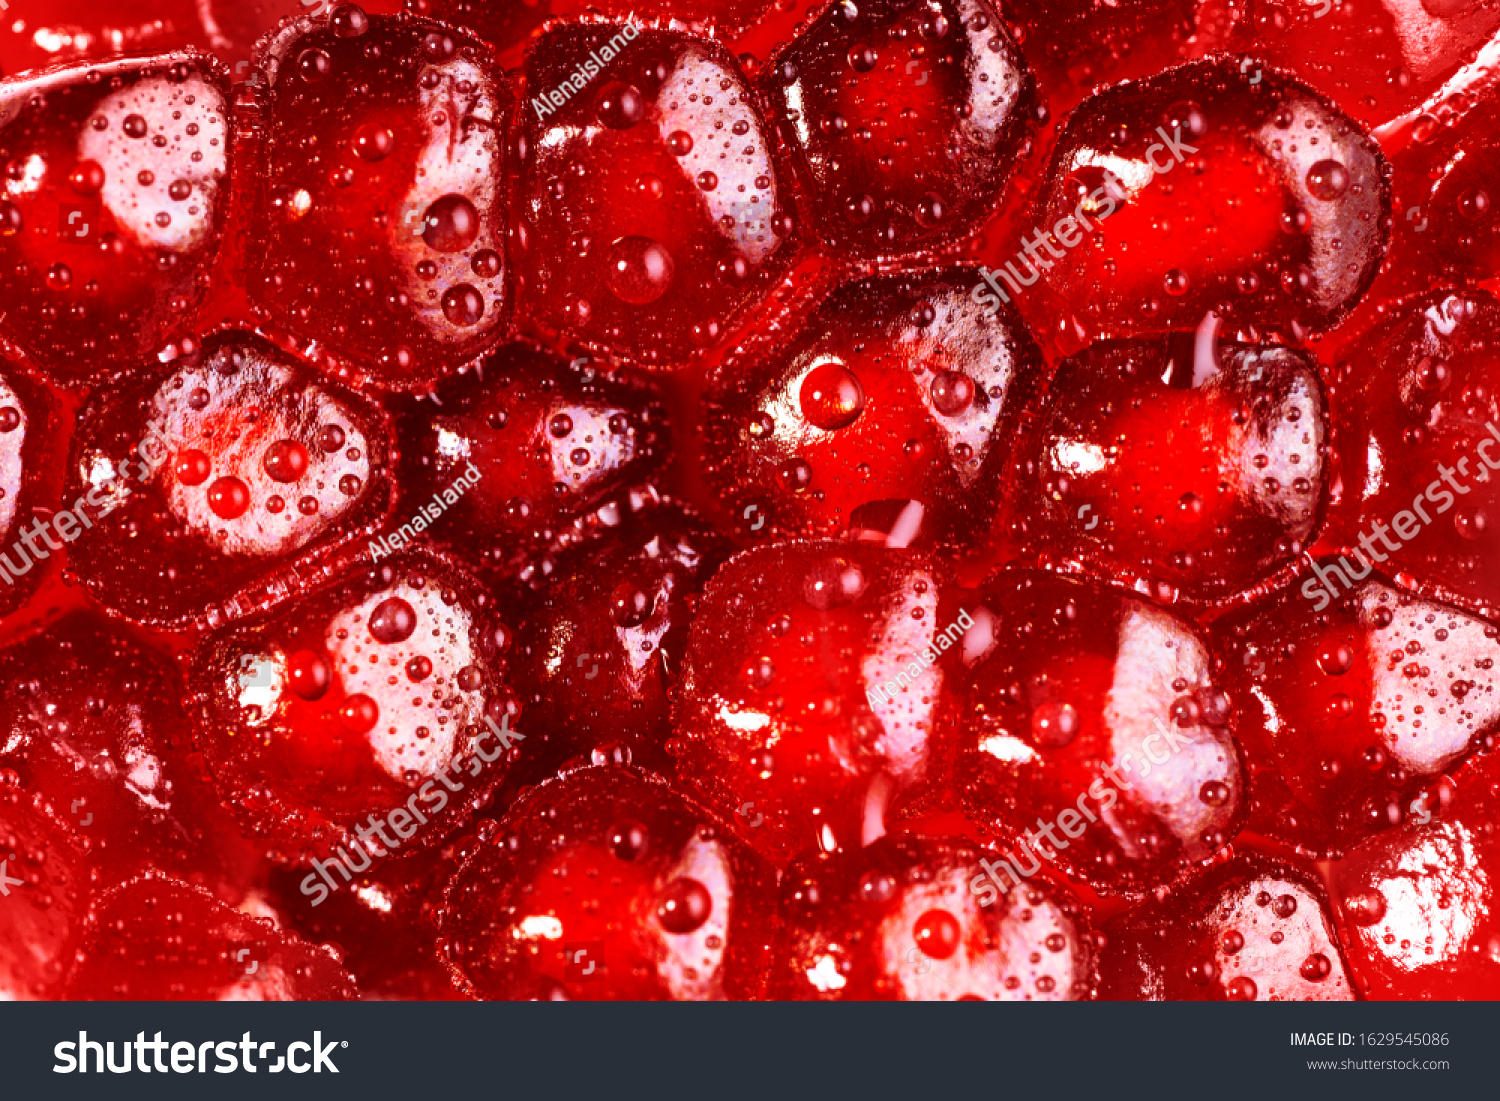 Pomegranate seeds close up background. Texture water drops on exotic fruit. #1629545086